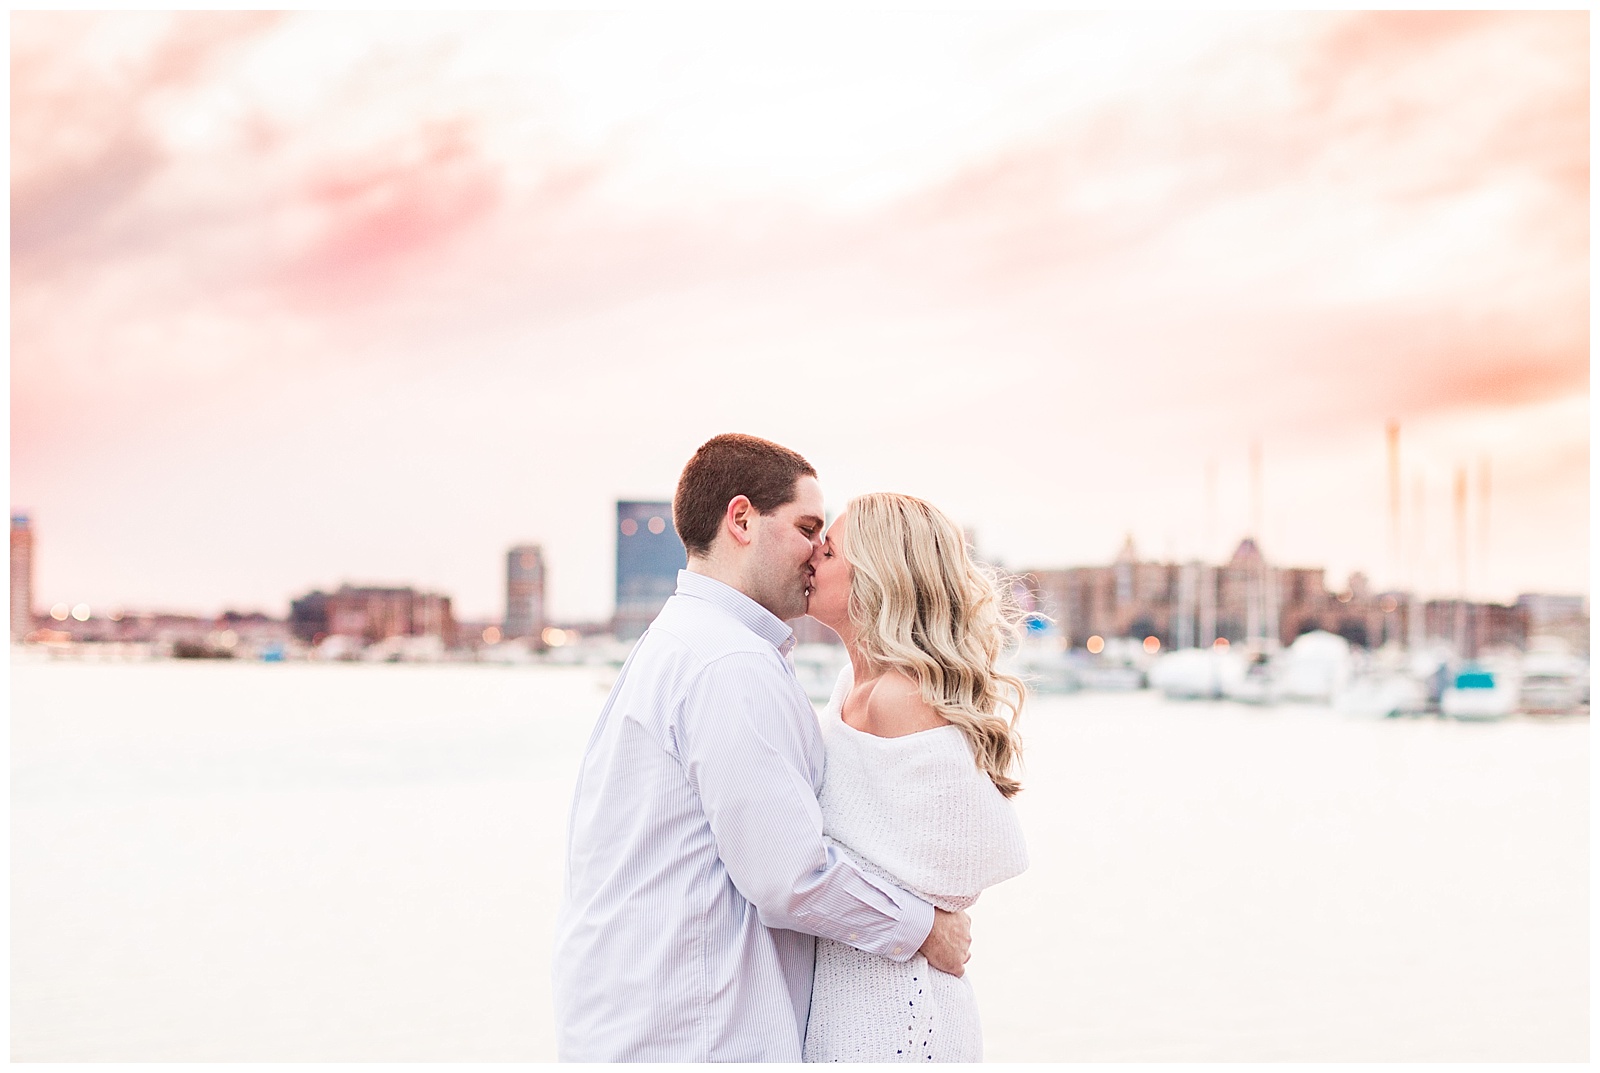 baltimore, wedding, photographer, baltimore wedding photographer, engagement sessions, engaged, natural light, golden hour, spring, fall, candid, outdoors, travel, rustic, nature, love, cute, happy, waterfront, maryland wedding photographer, maryland, hannah mink photography